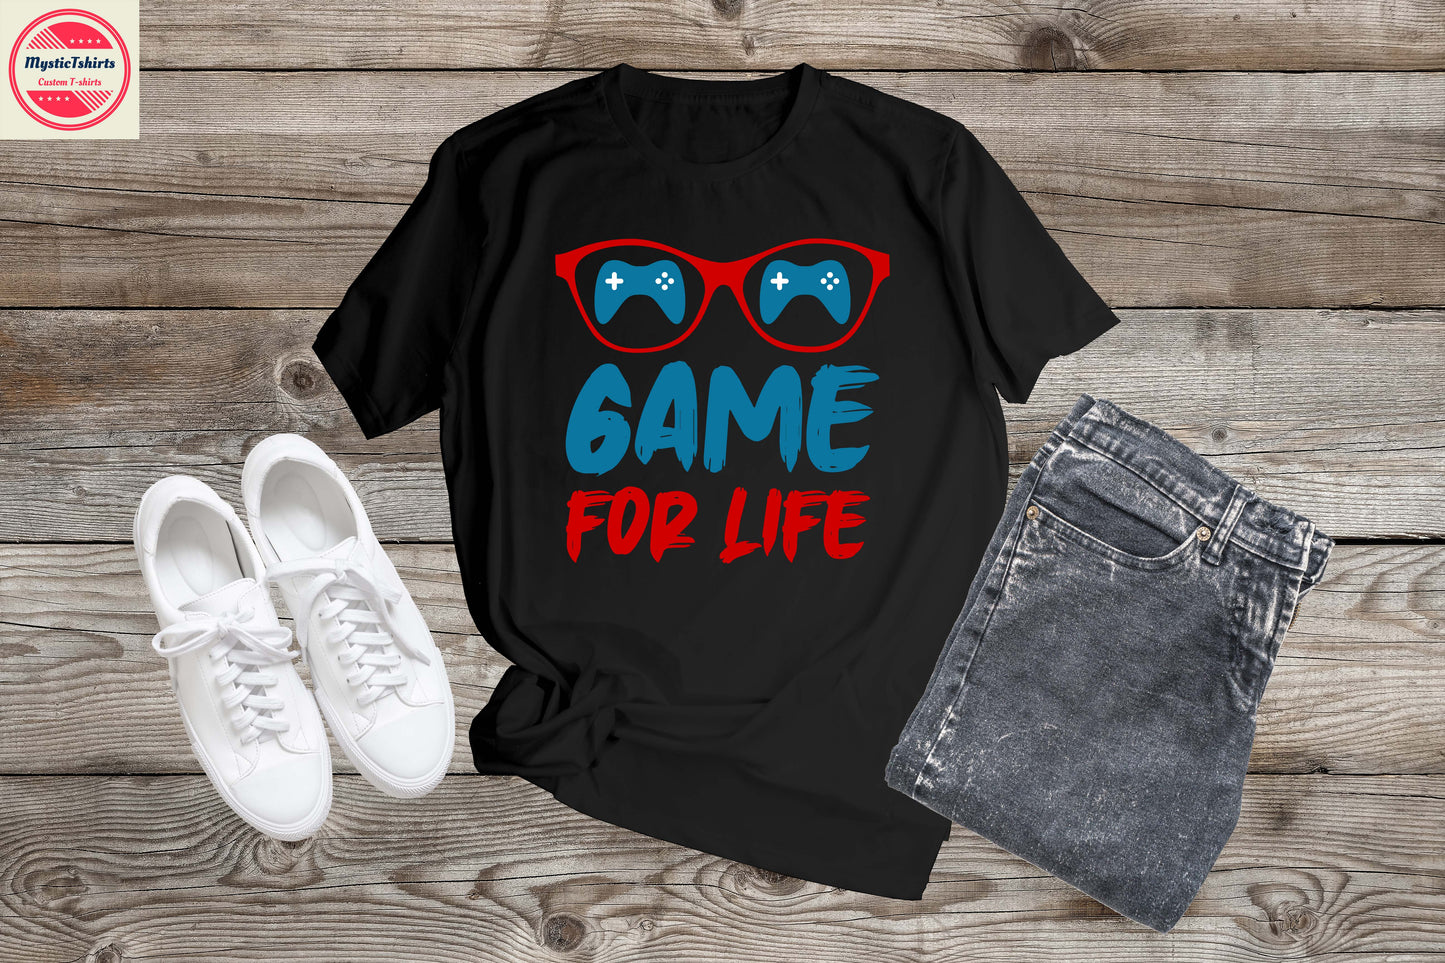 164. GAME FOR LIFE, Custom Made Shirt, Personalized T-Shirt, Custom Text, Make Your Own Shirt, Custom Tee